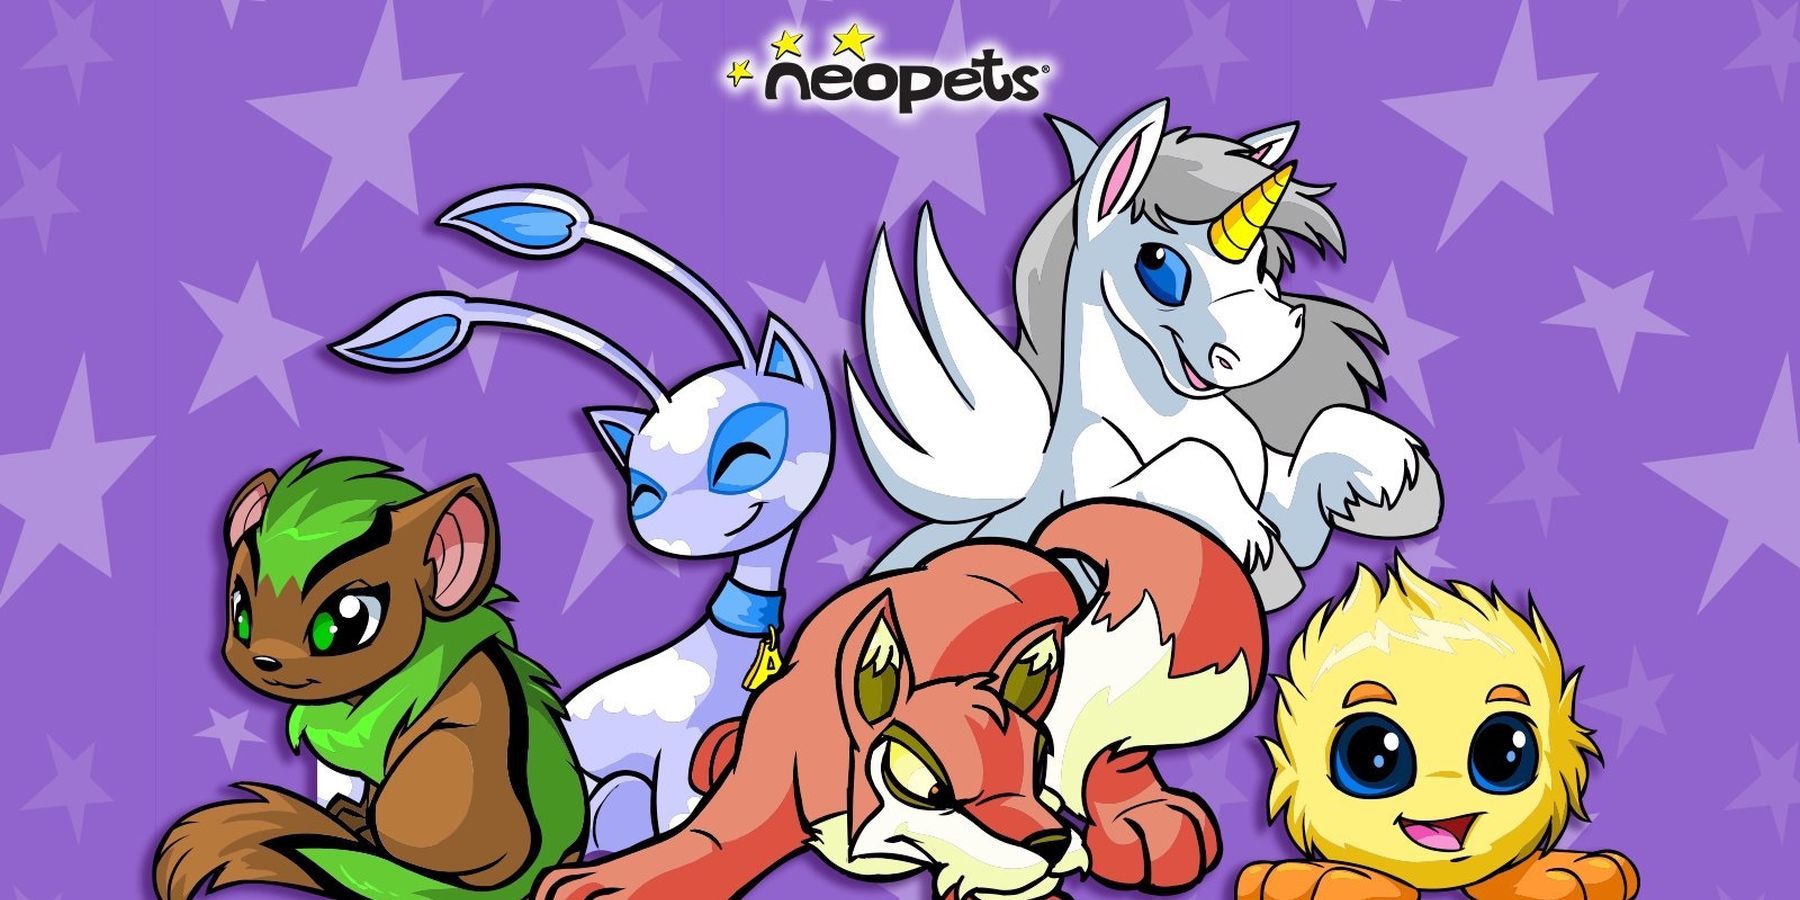 Neopets NFTs Are Coming in October